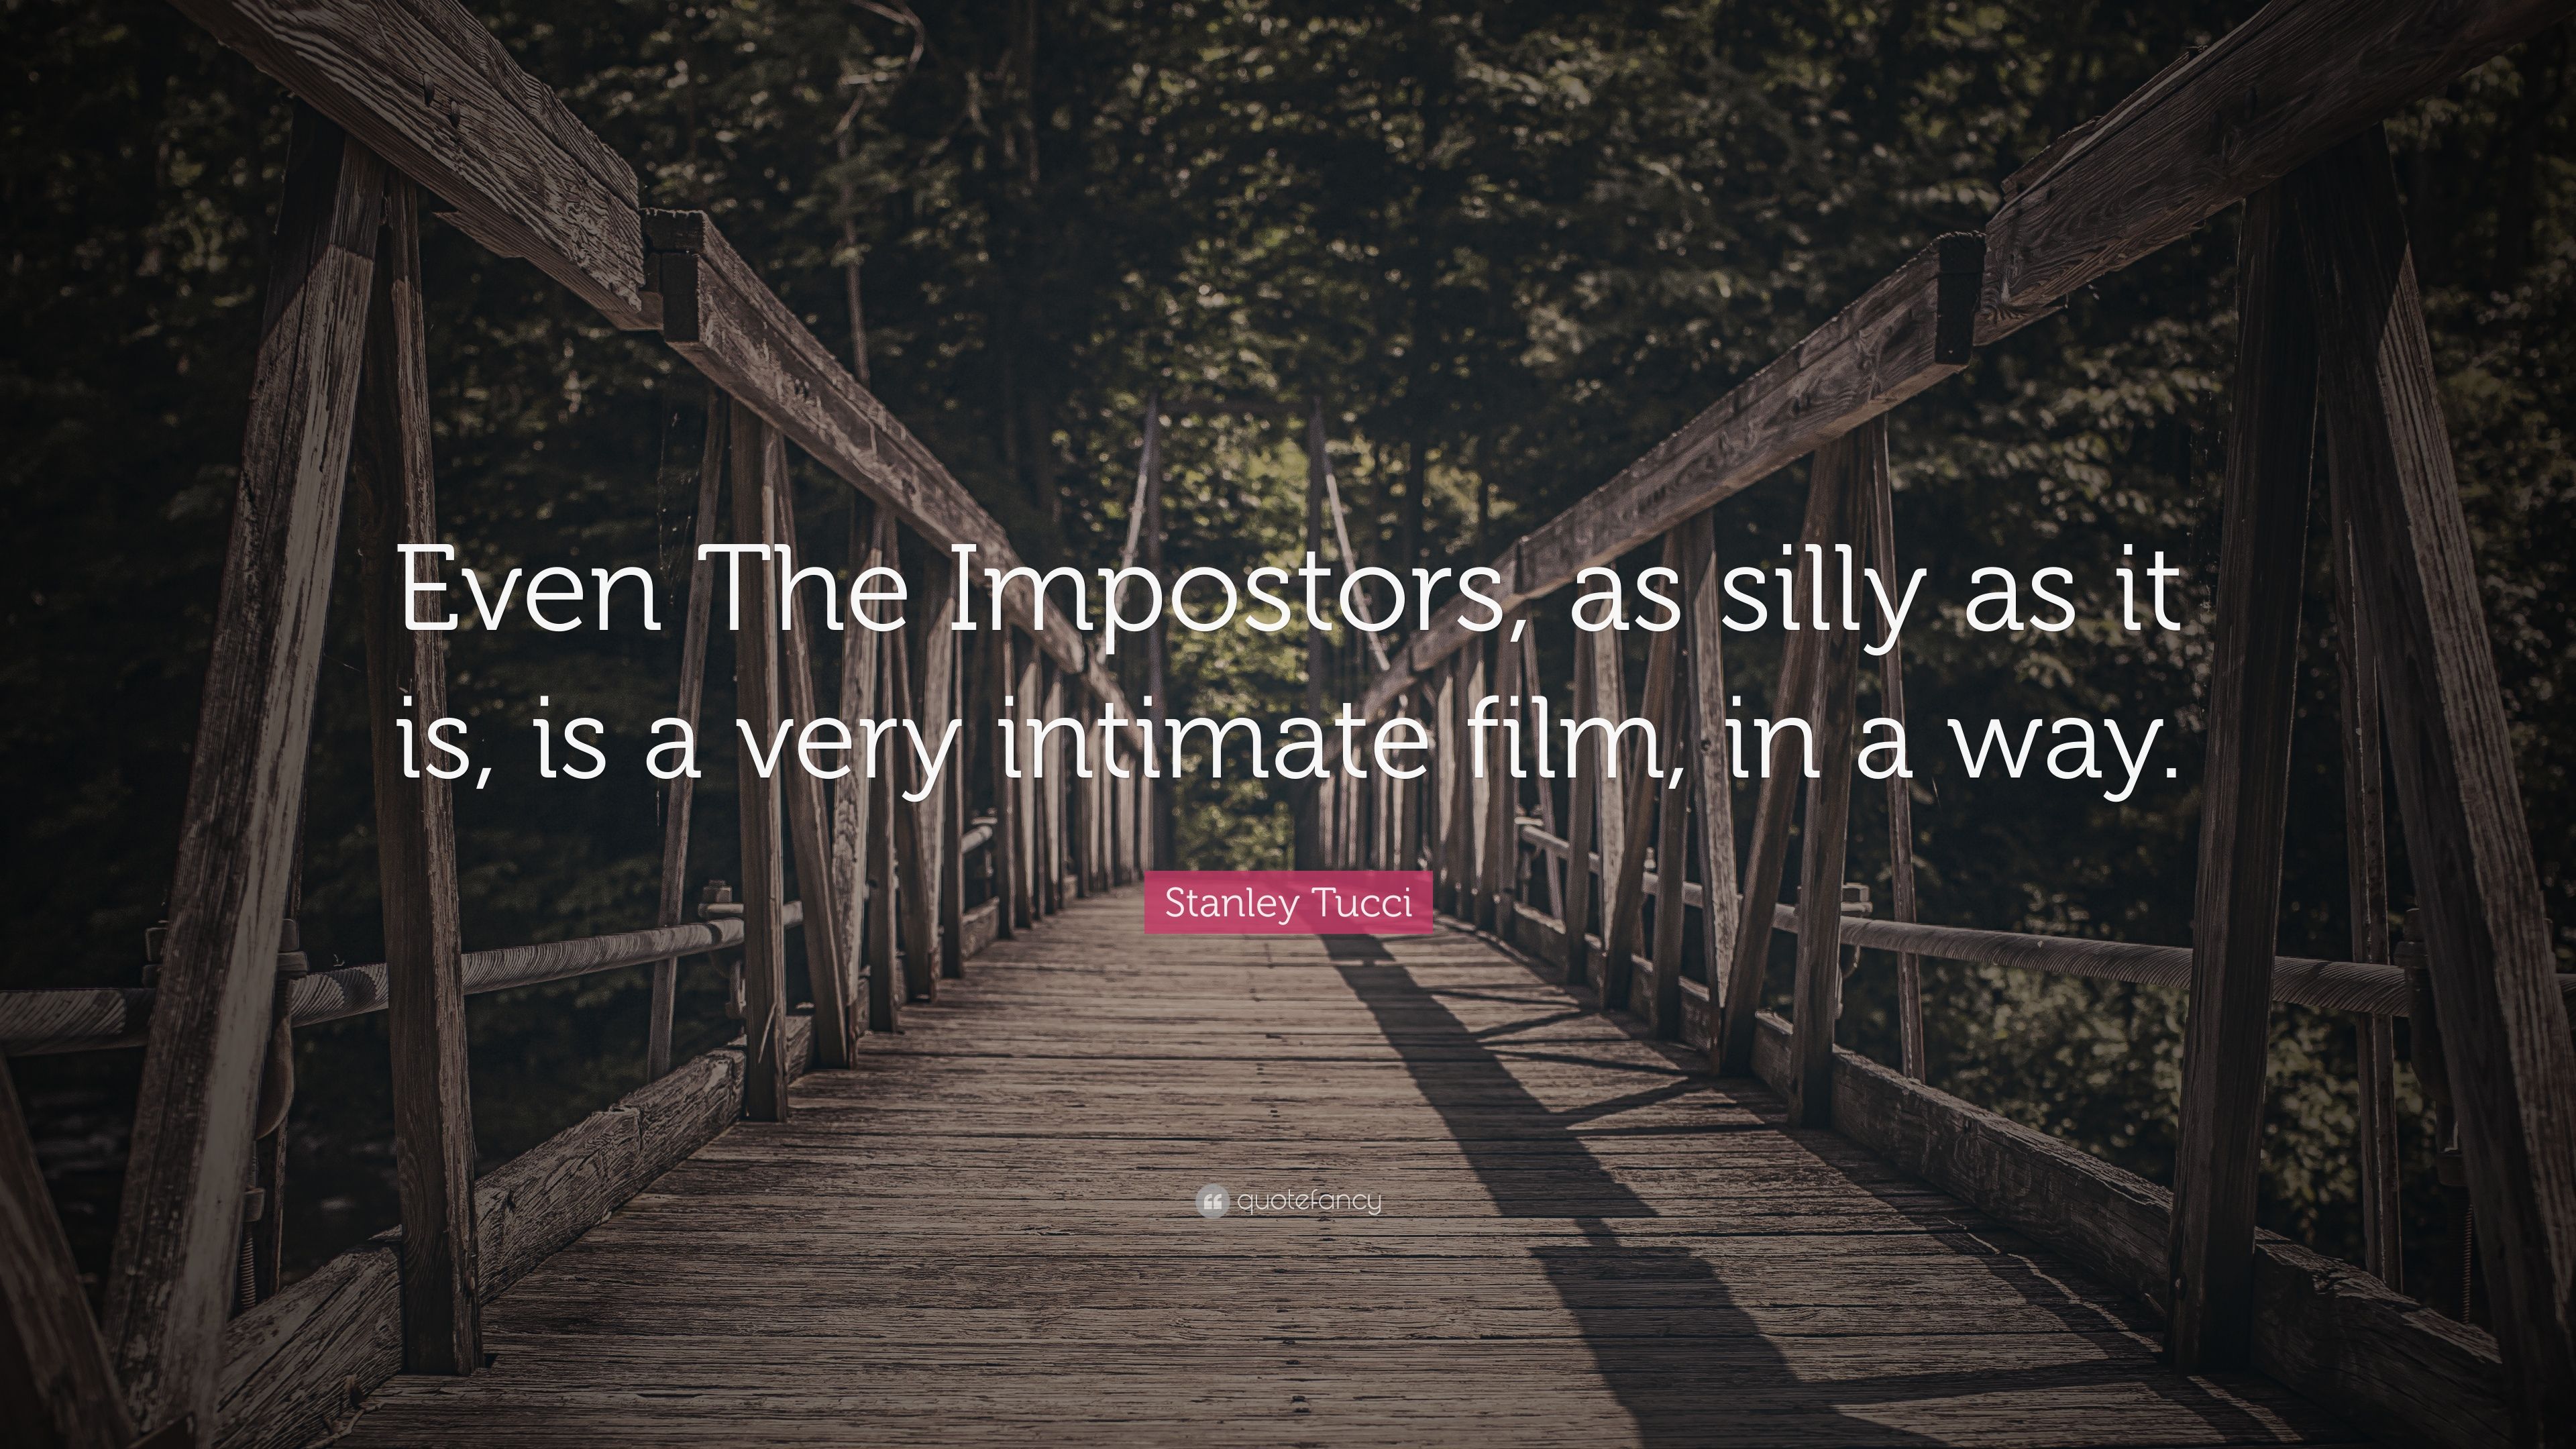 Stanley Tucci Quote: “Even The Impostors, as silly as it is, is a